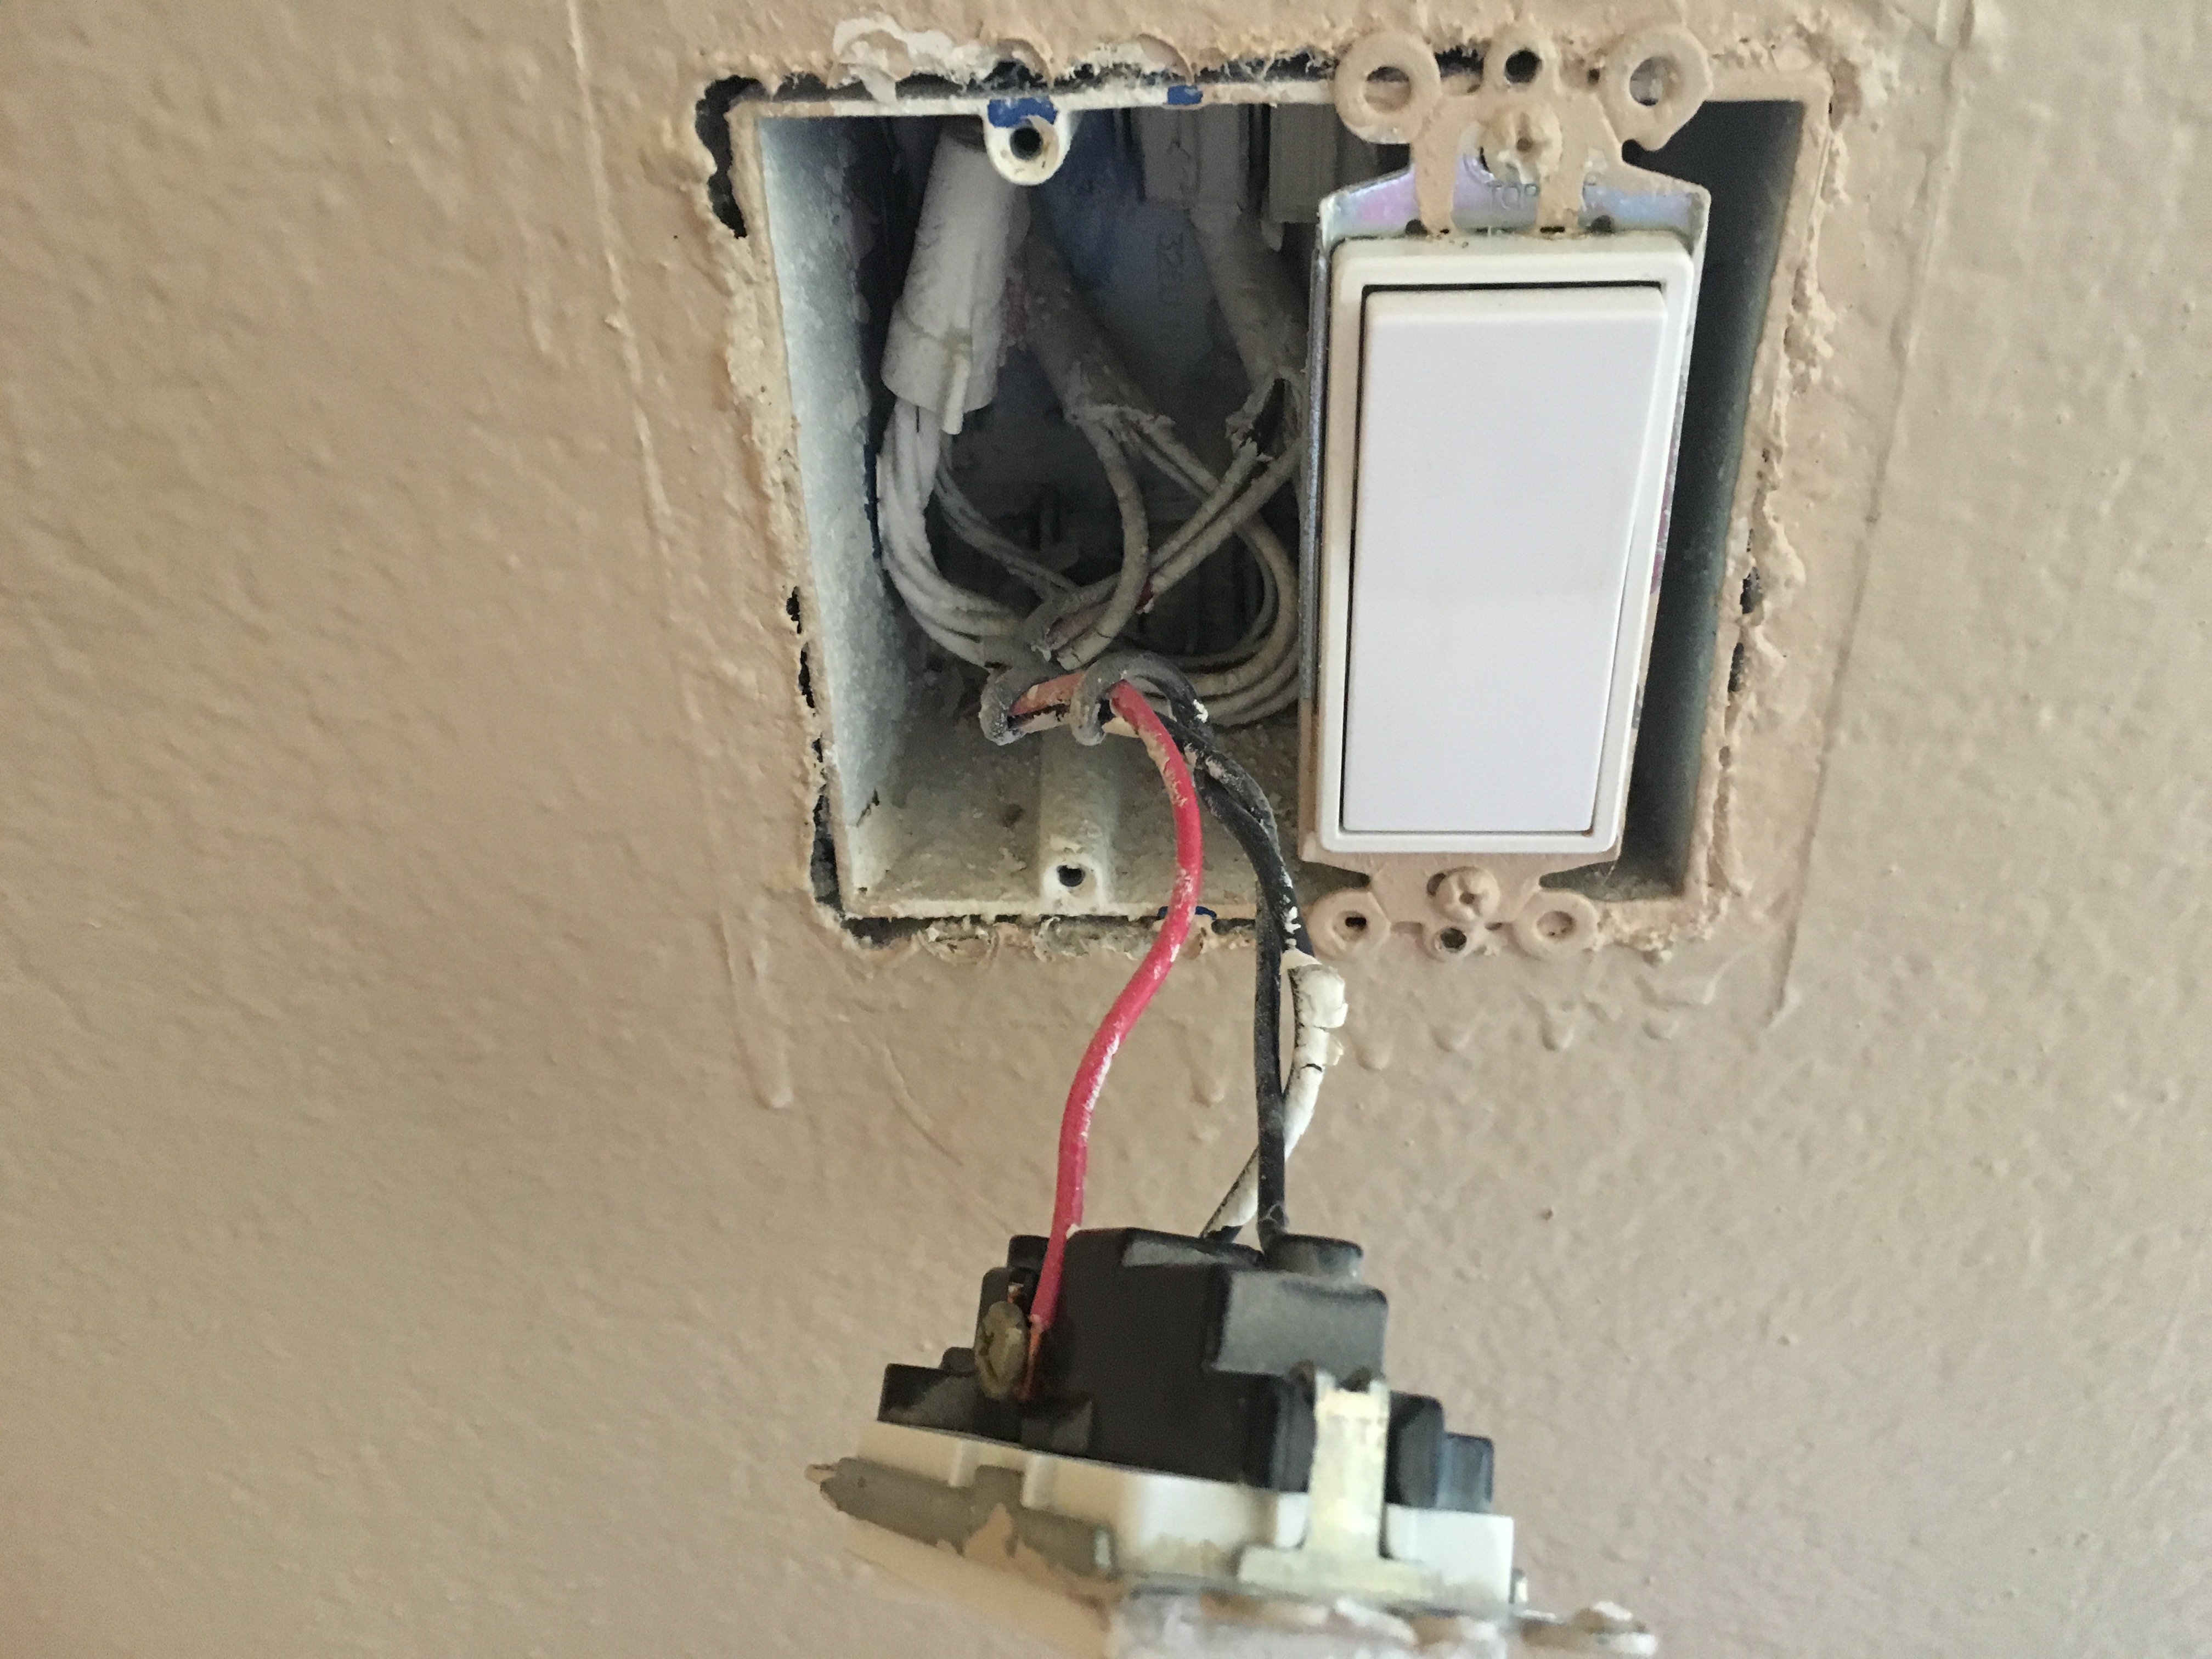 Wall Switch For Ceiling Fan And Light